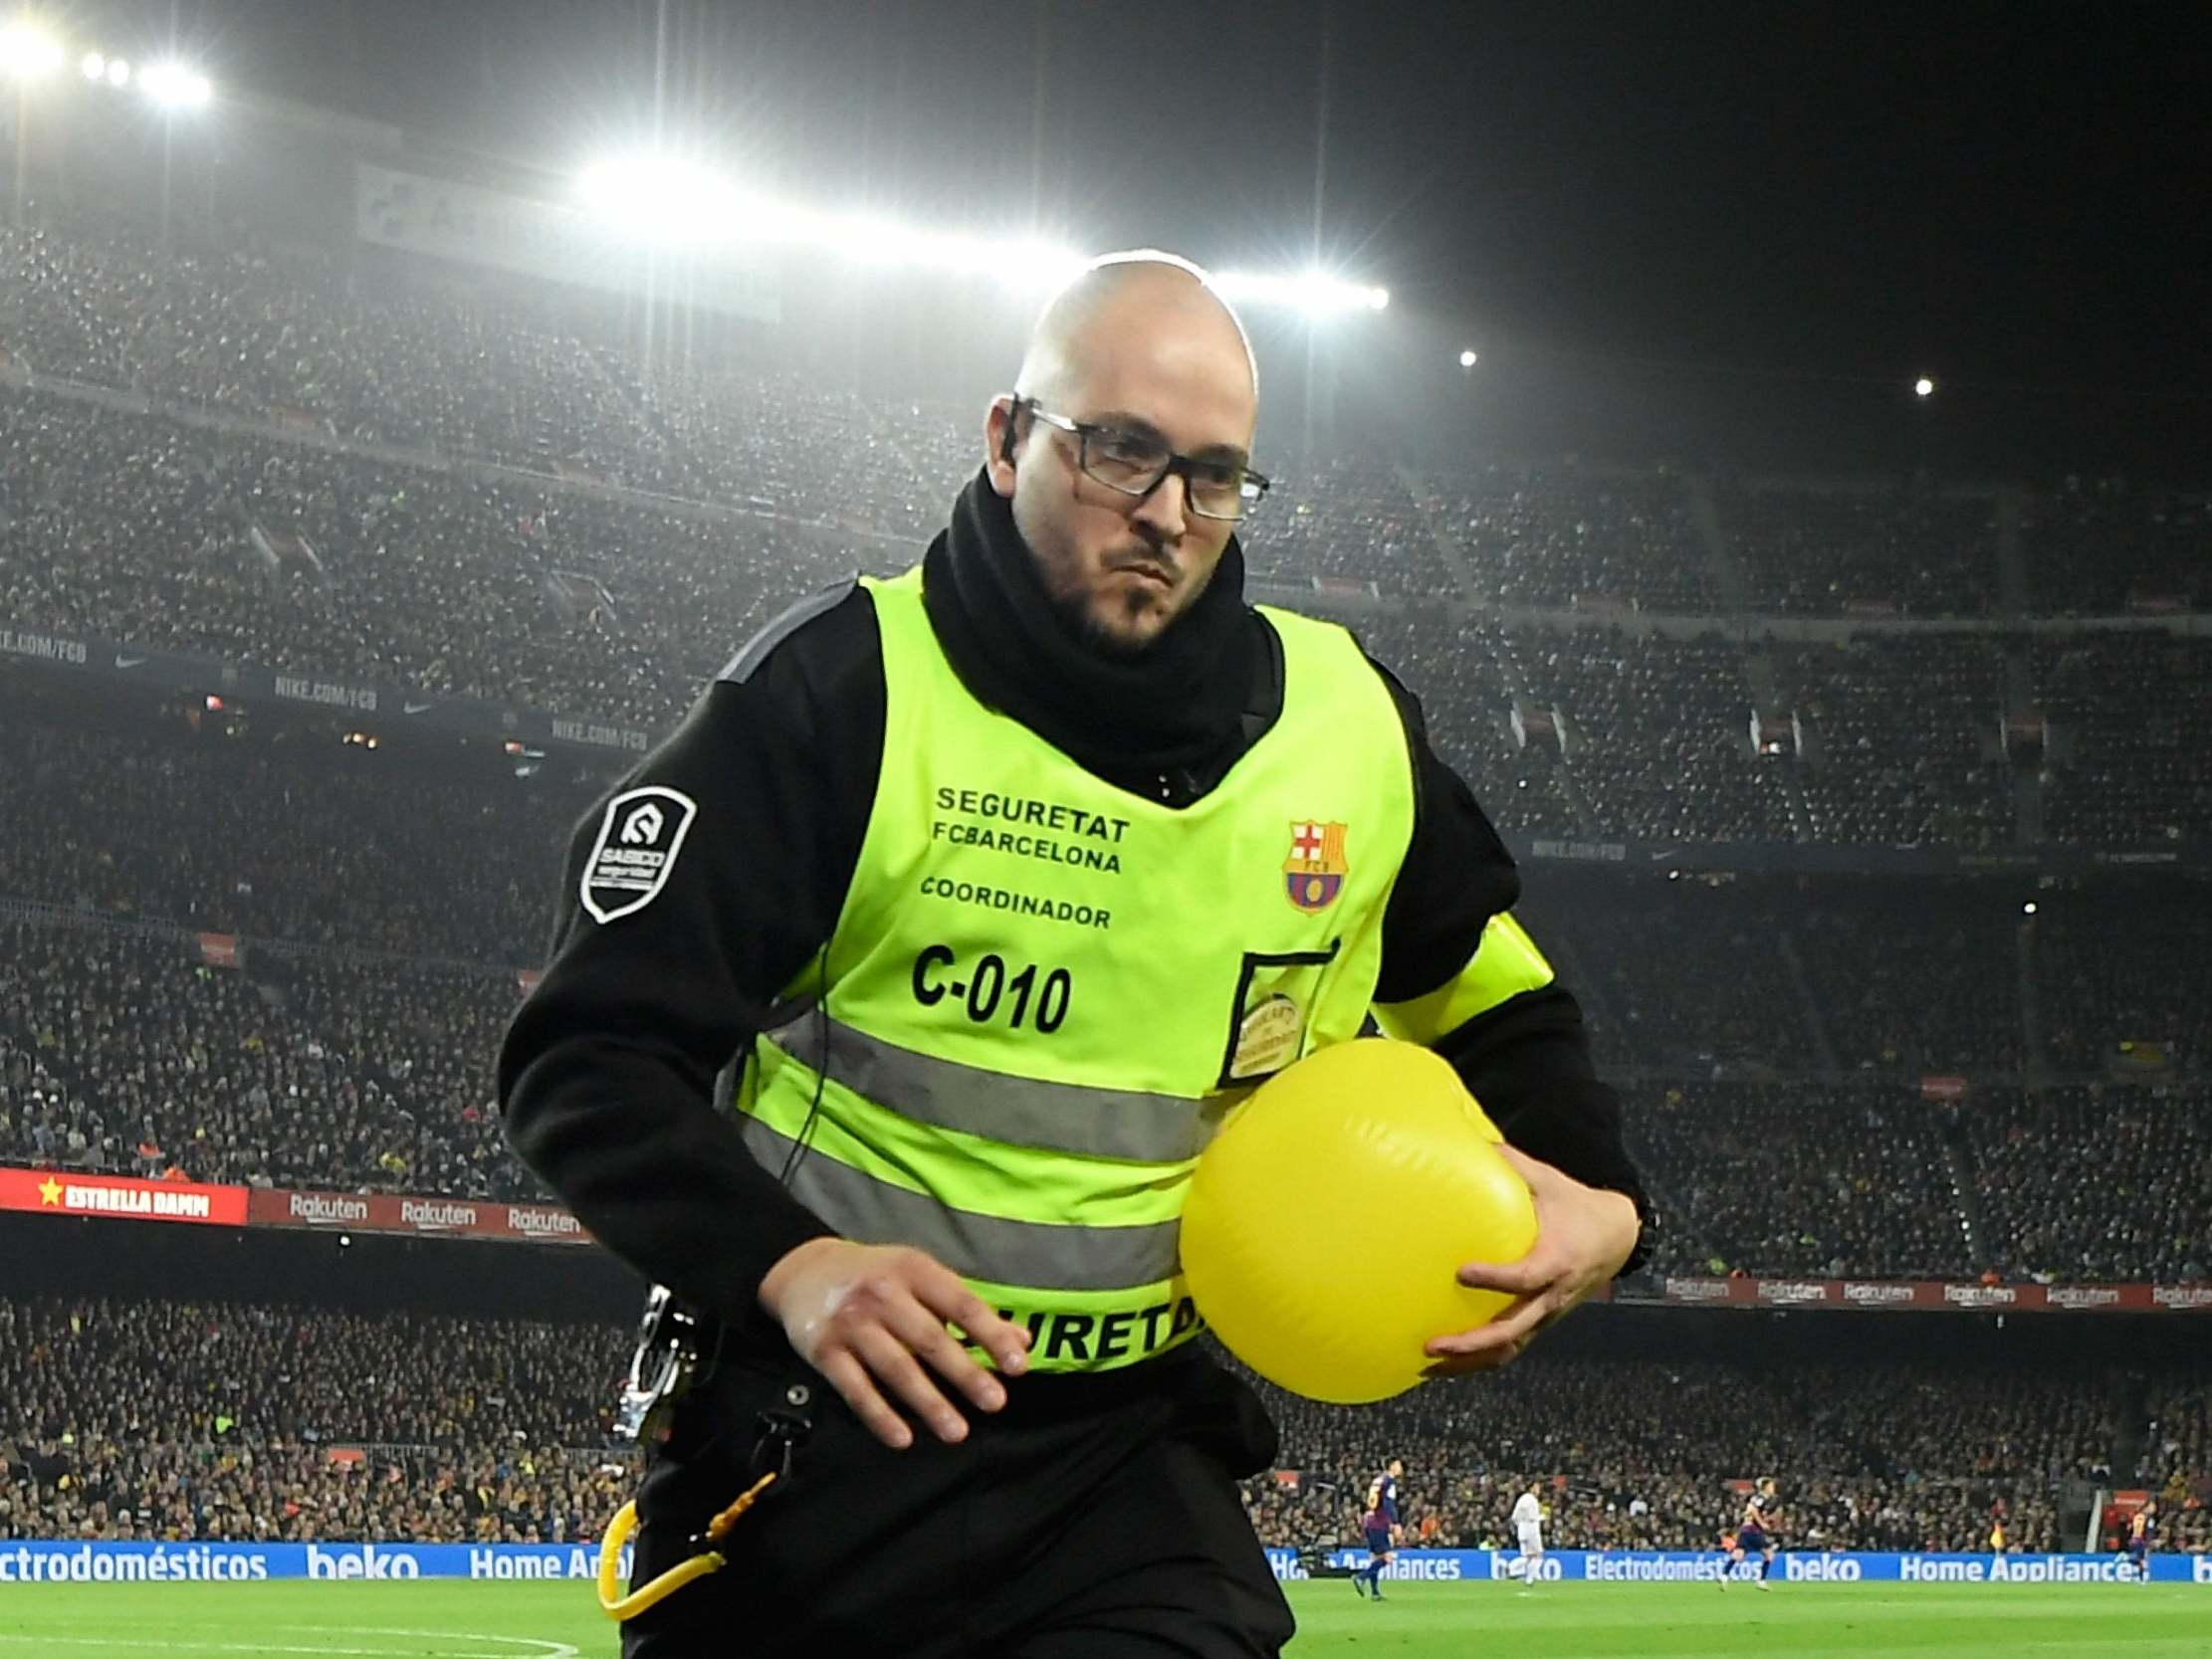 A steward helps to clear the pitch during a protest at El Clasico